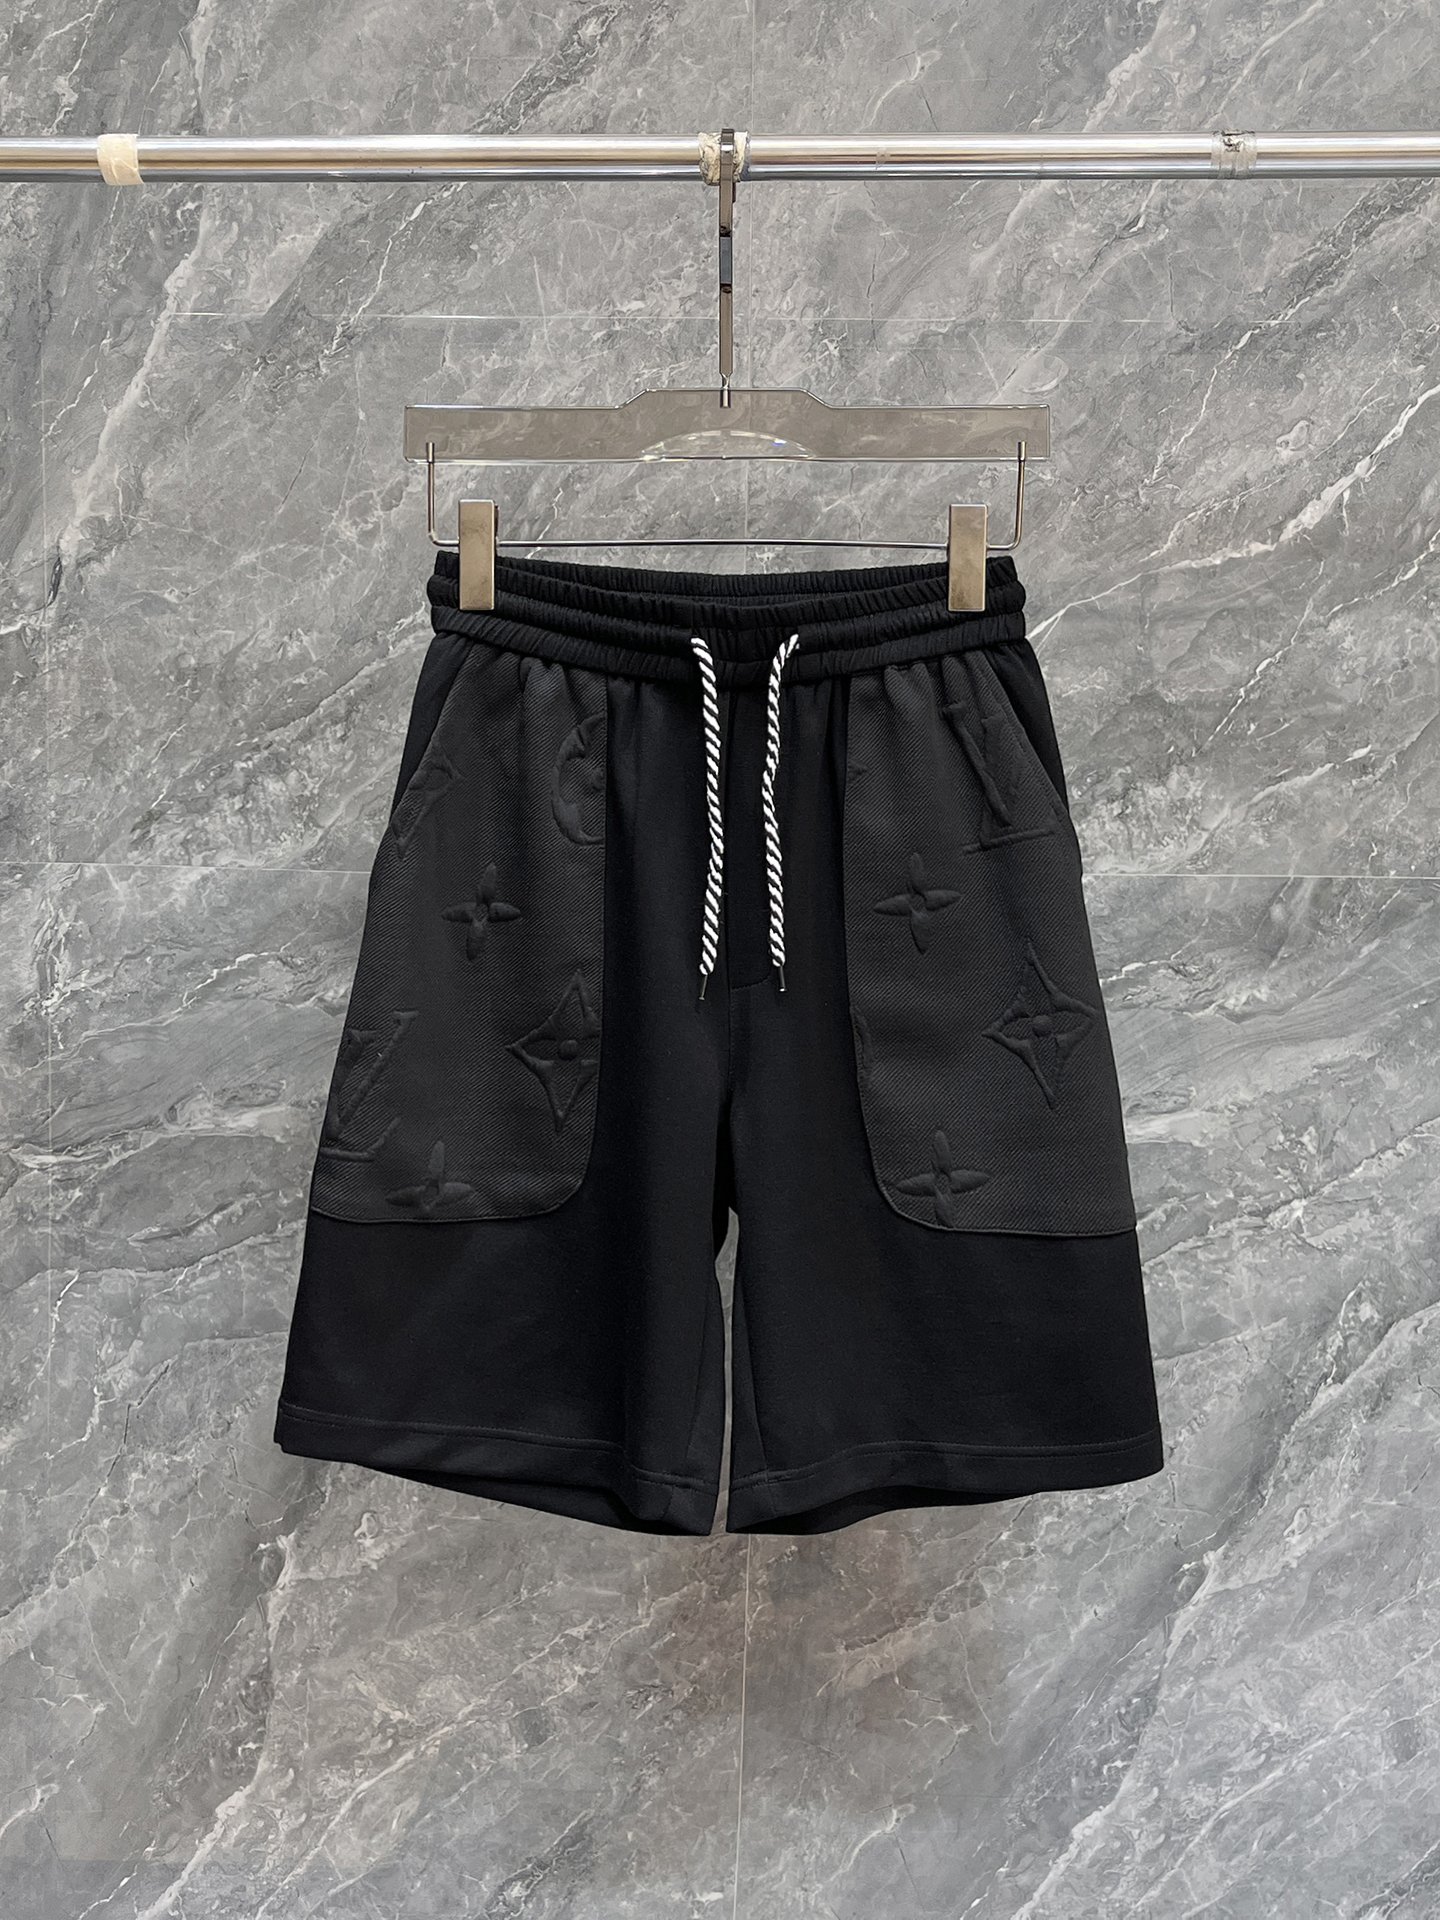 Louis Vuitton Clothing Shorts Replcia Cheap From China
 Men Summer Collection Casual